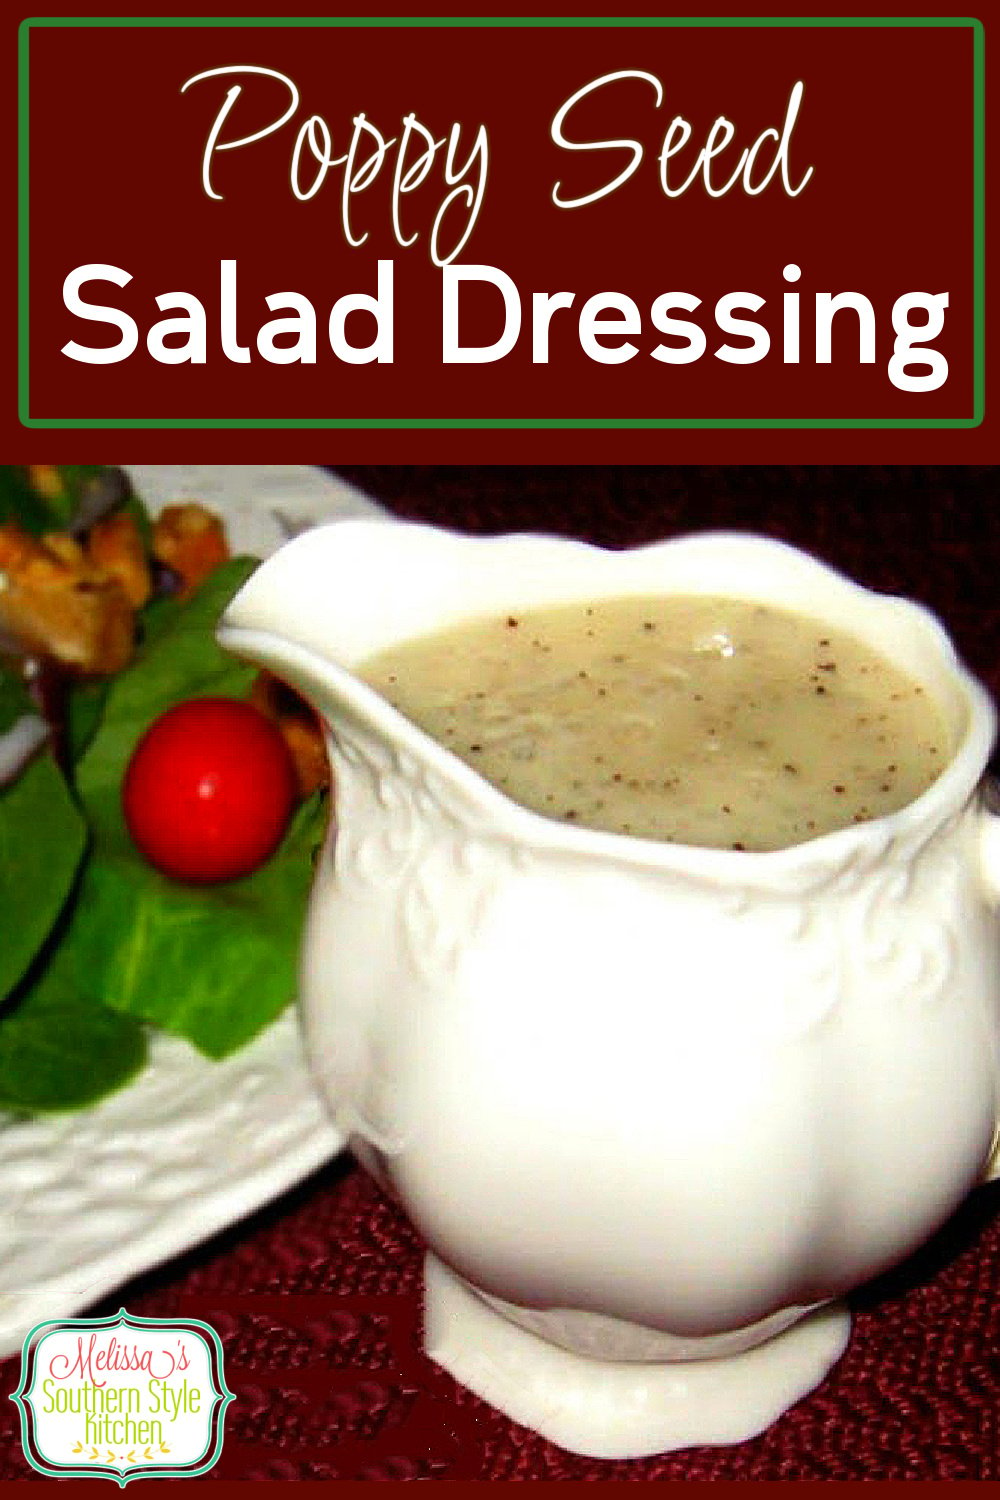 Treat the family to this Homemade Poppy Seed Salad Dressing drizzled on your favorite salad #poppyseeddressing #saladdressings #salads #dressing #southernfood #southernrecipes #melissassouthernstylekitchen via @melissasssk